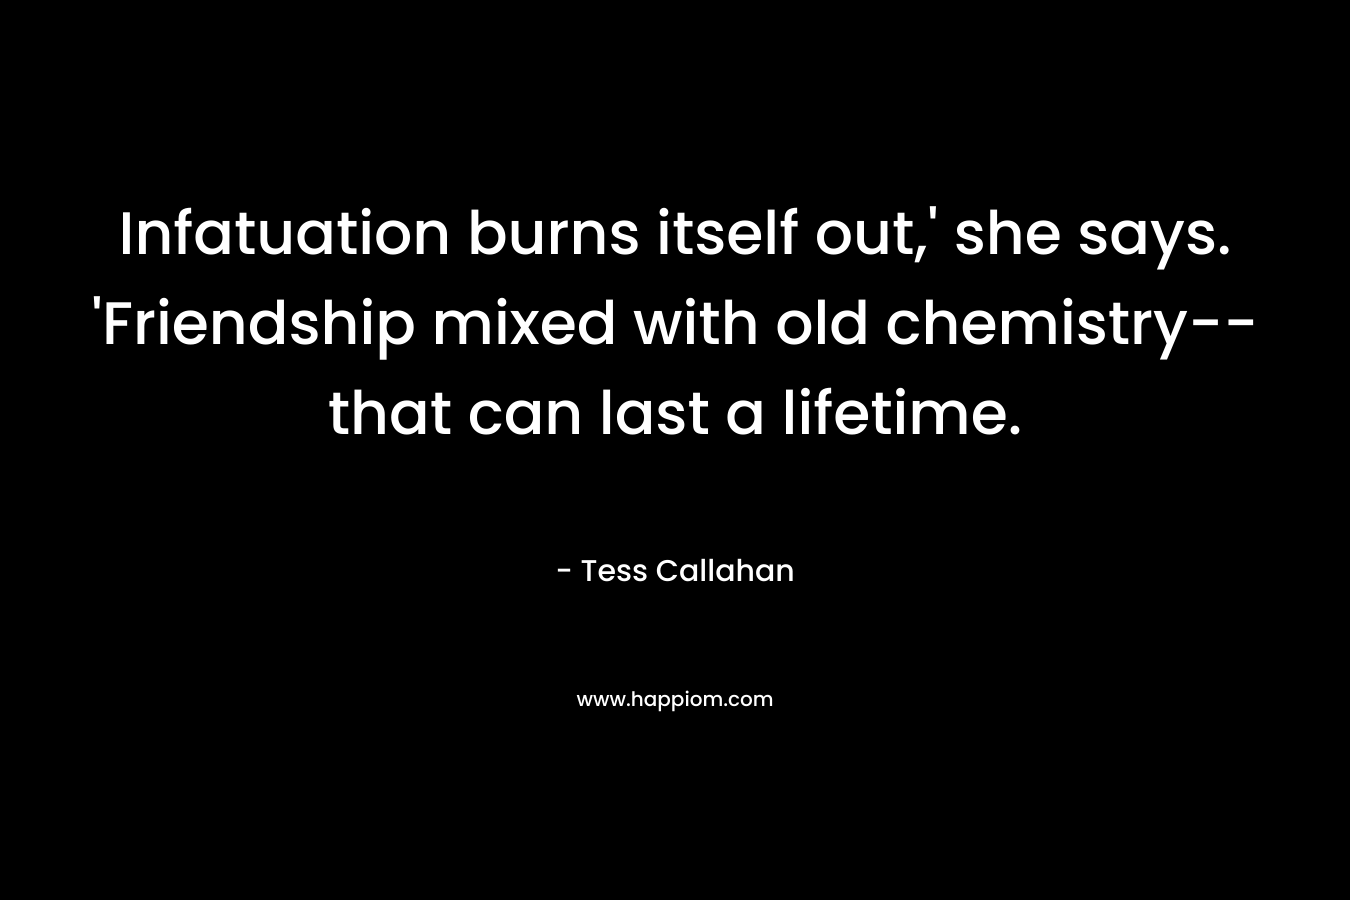 Infatuation burns itself out,’ she says. ‘Friendship mixed with old chemistry–that can last a lifetime. – Tess Callahan